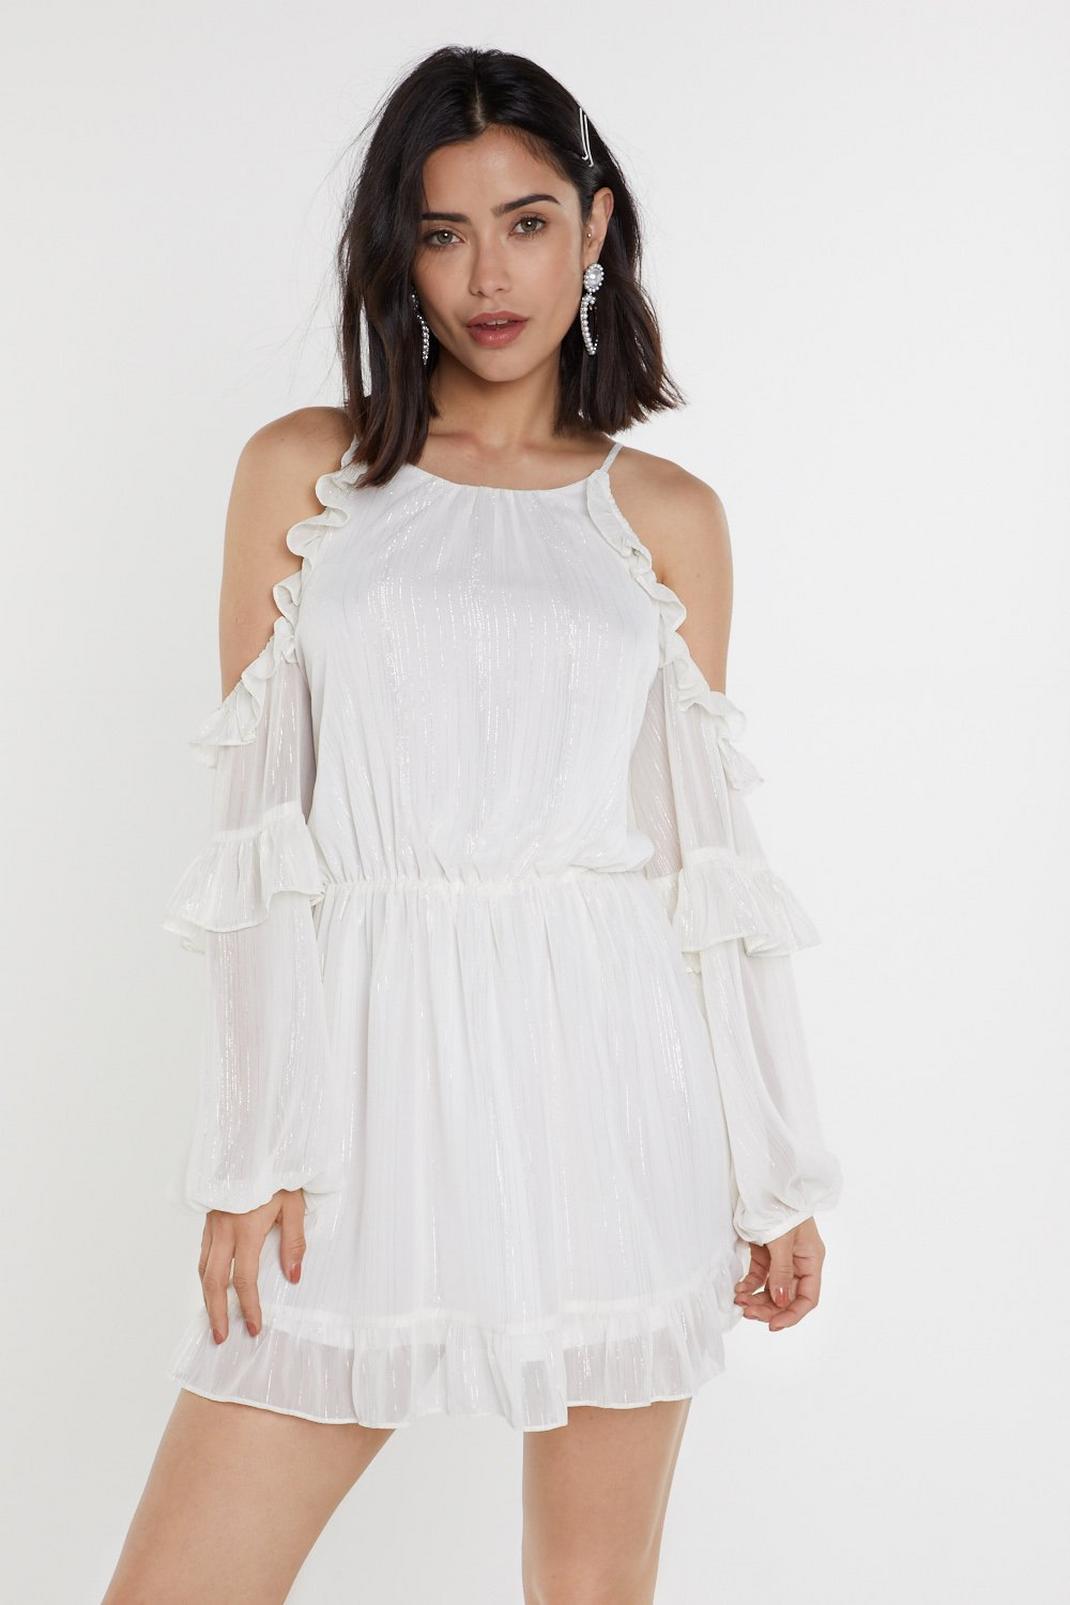 Don't Sleeve Me That Way Cold Shoulder Ruffle Dress | Nasty Gal